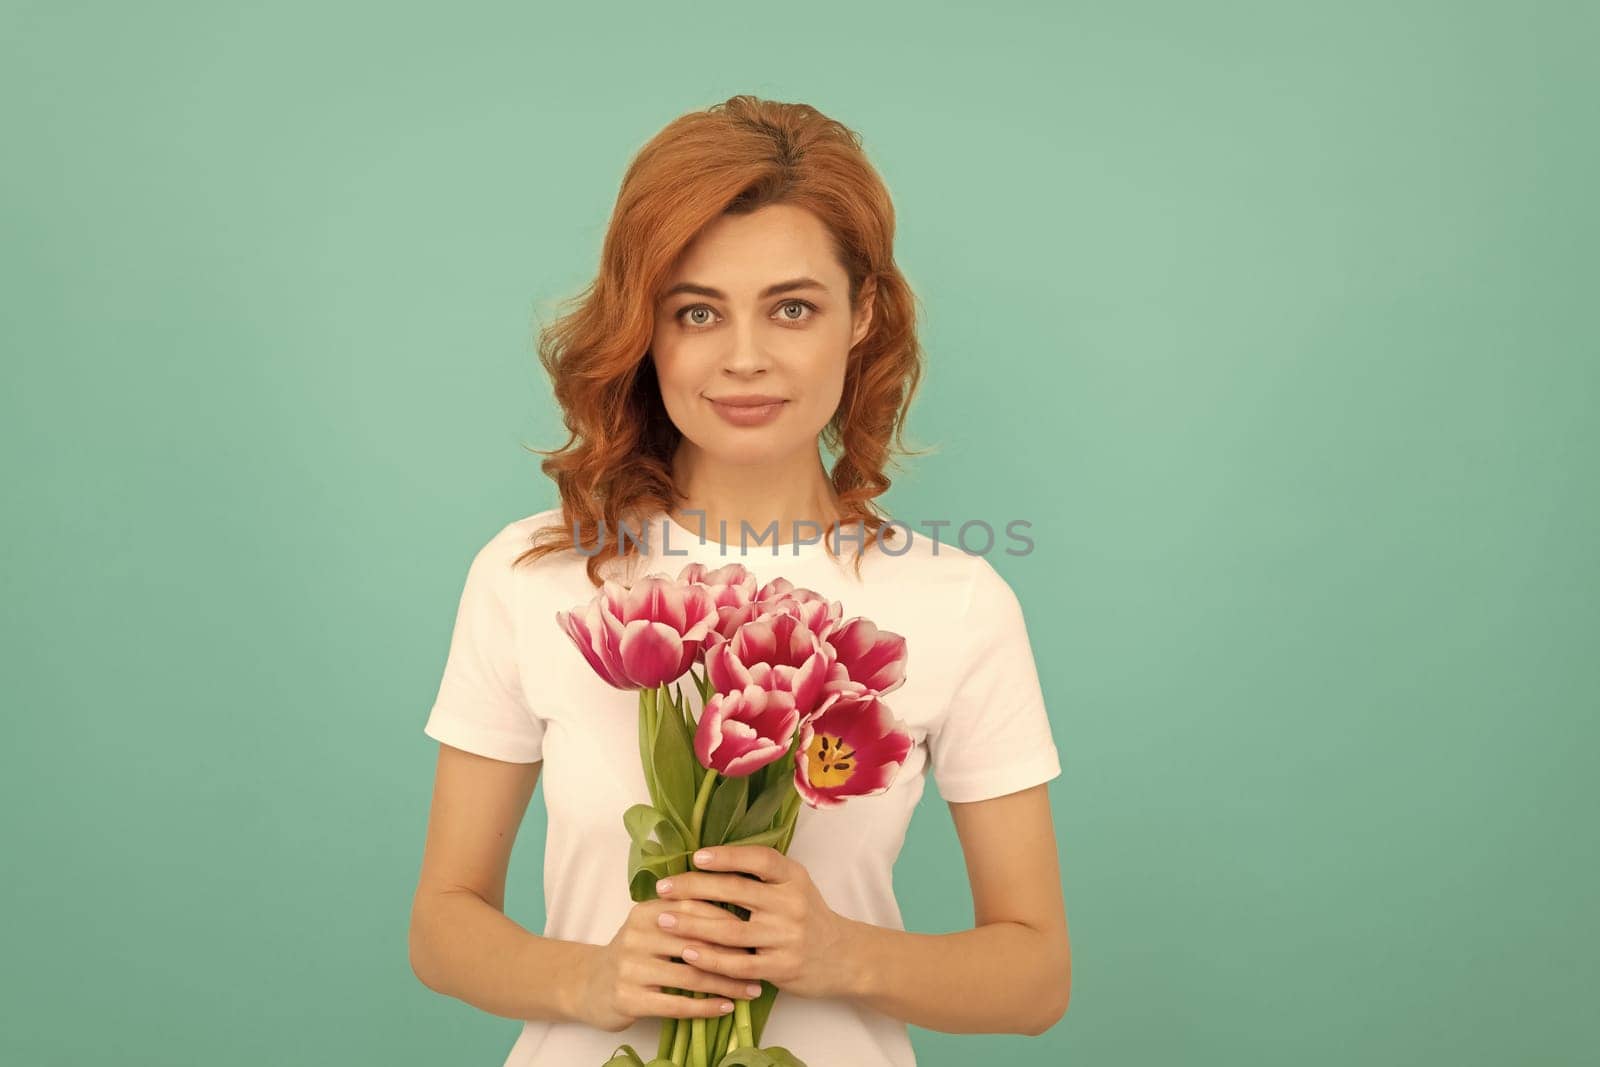 girl with tulip flower bouquet on blue background.